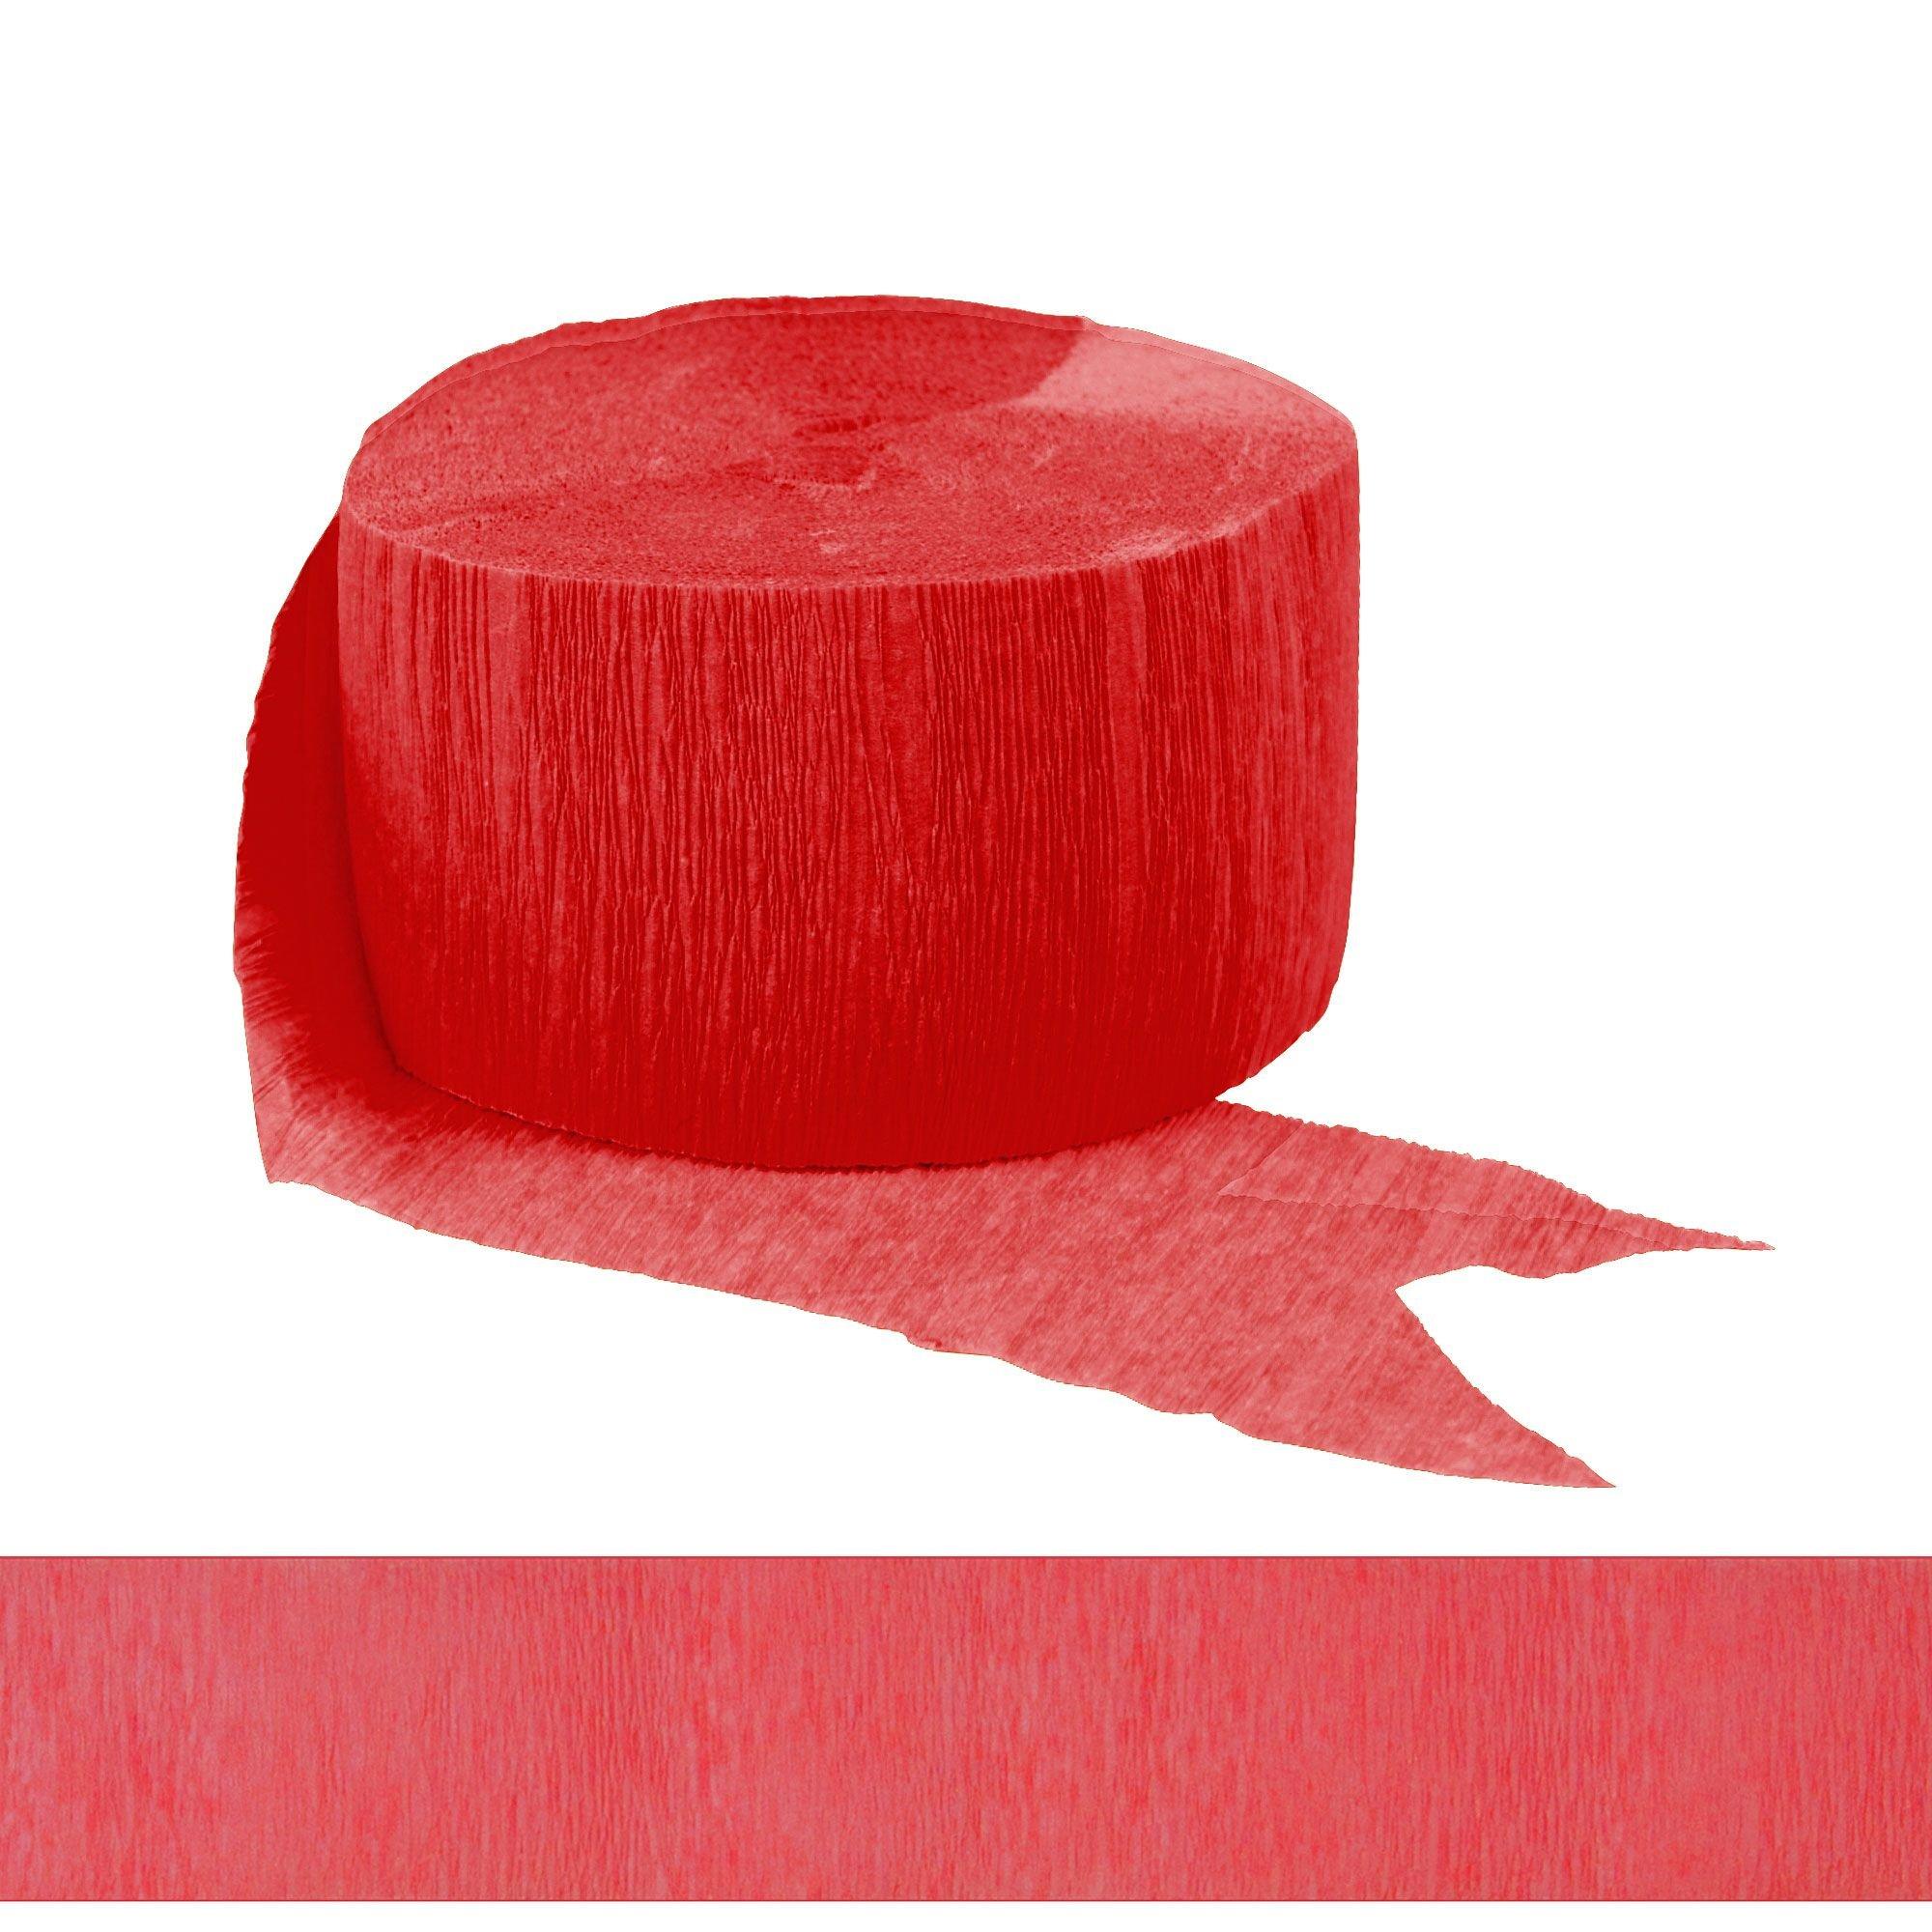 Crepe Paper - Streamers Party Decorations - 150 ft. Rolls - Red